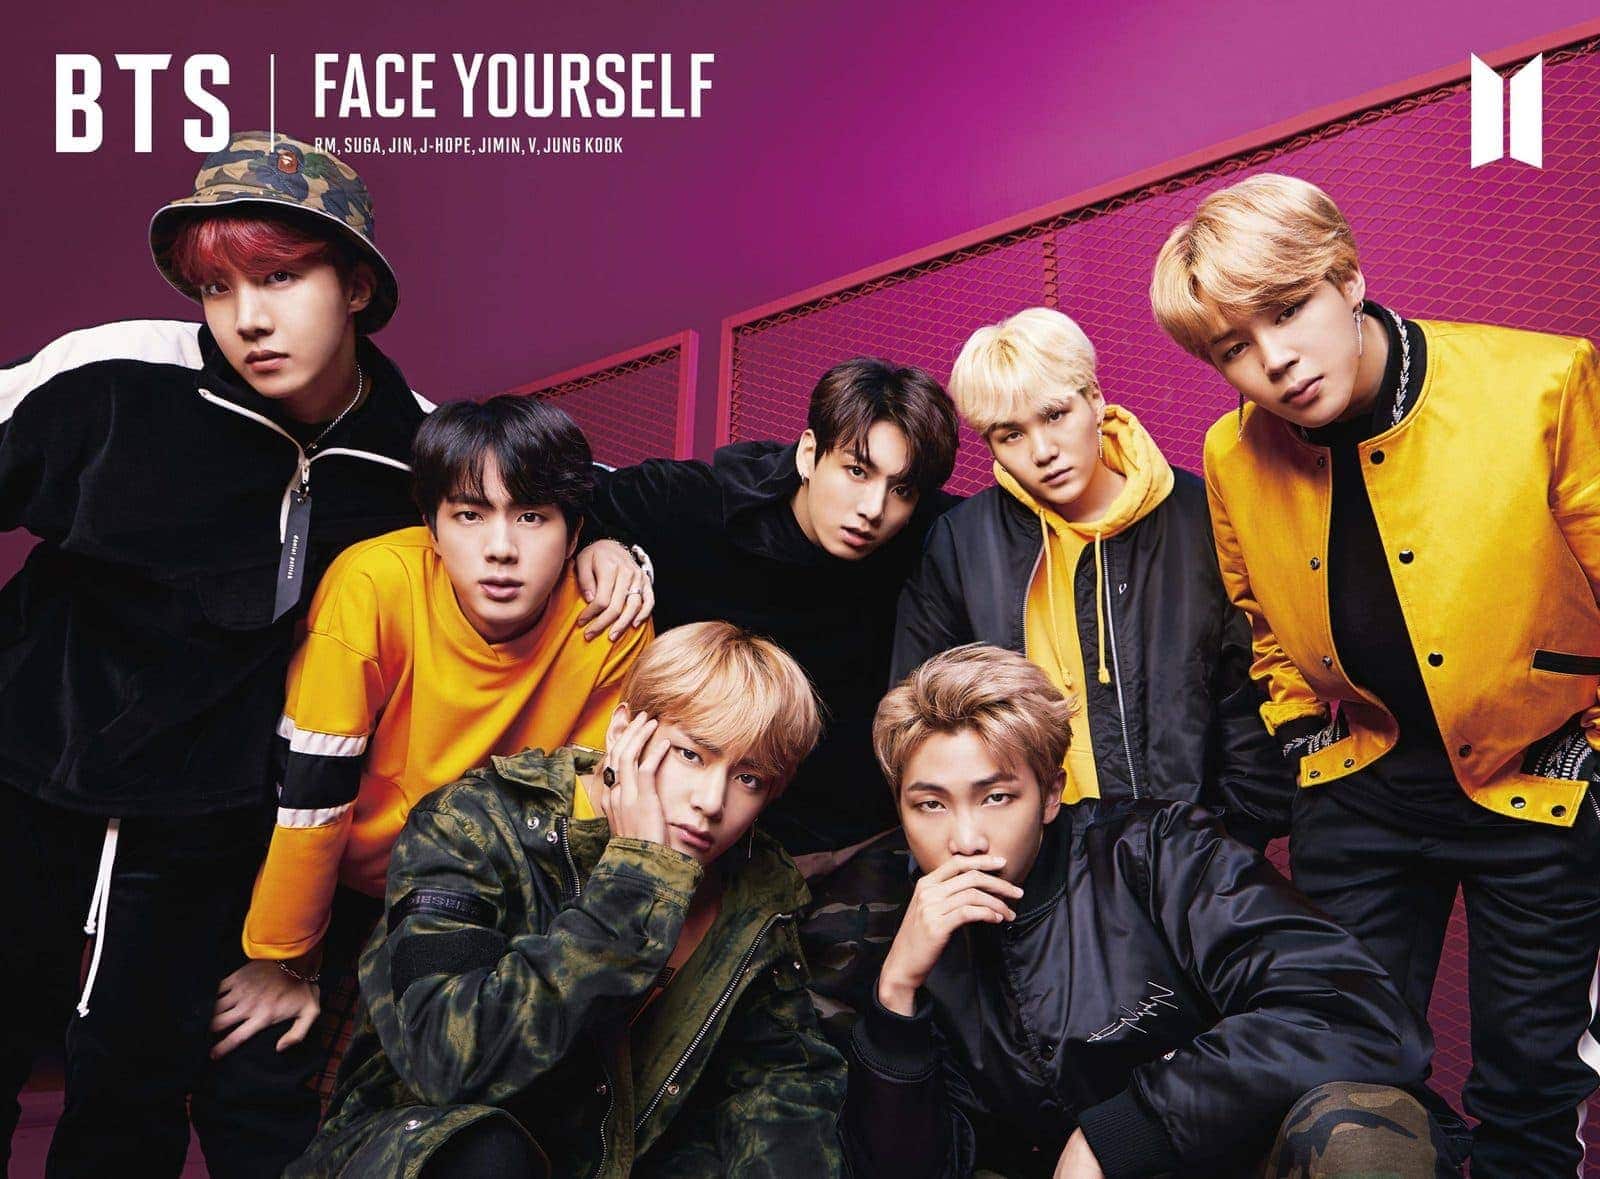 BTS Poster - Face Yourself